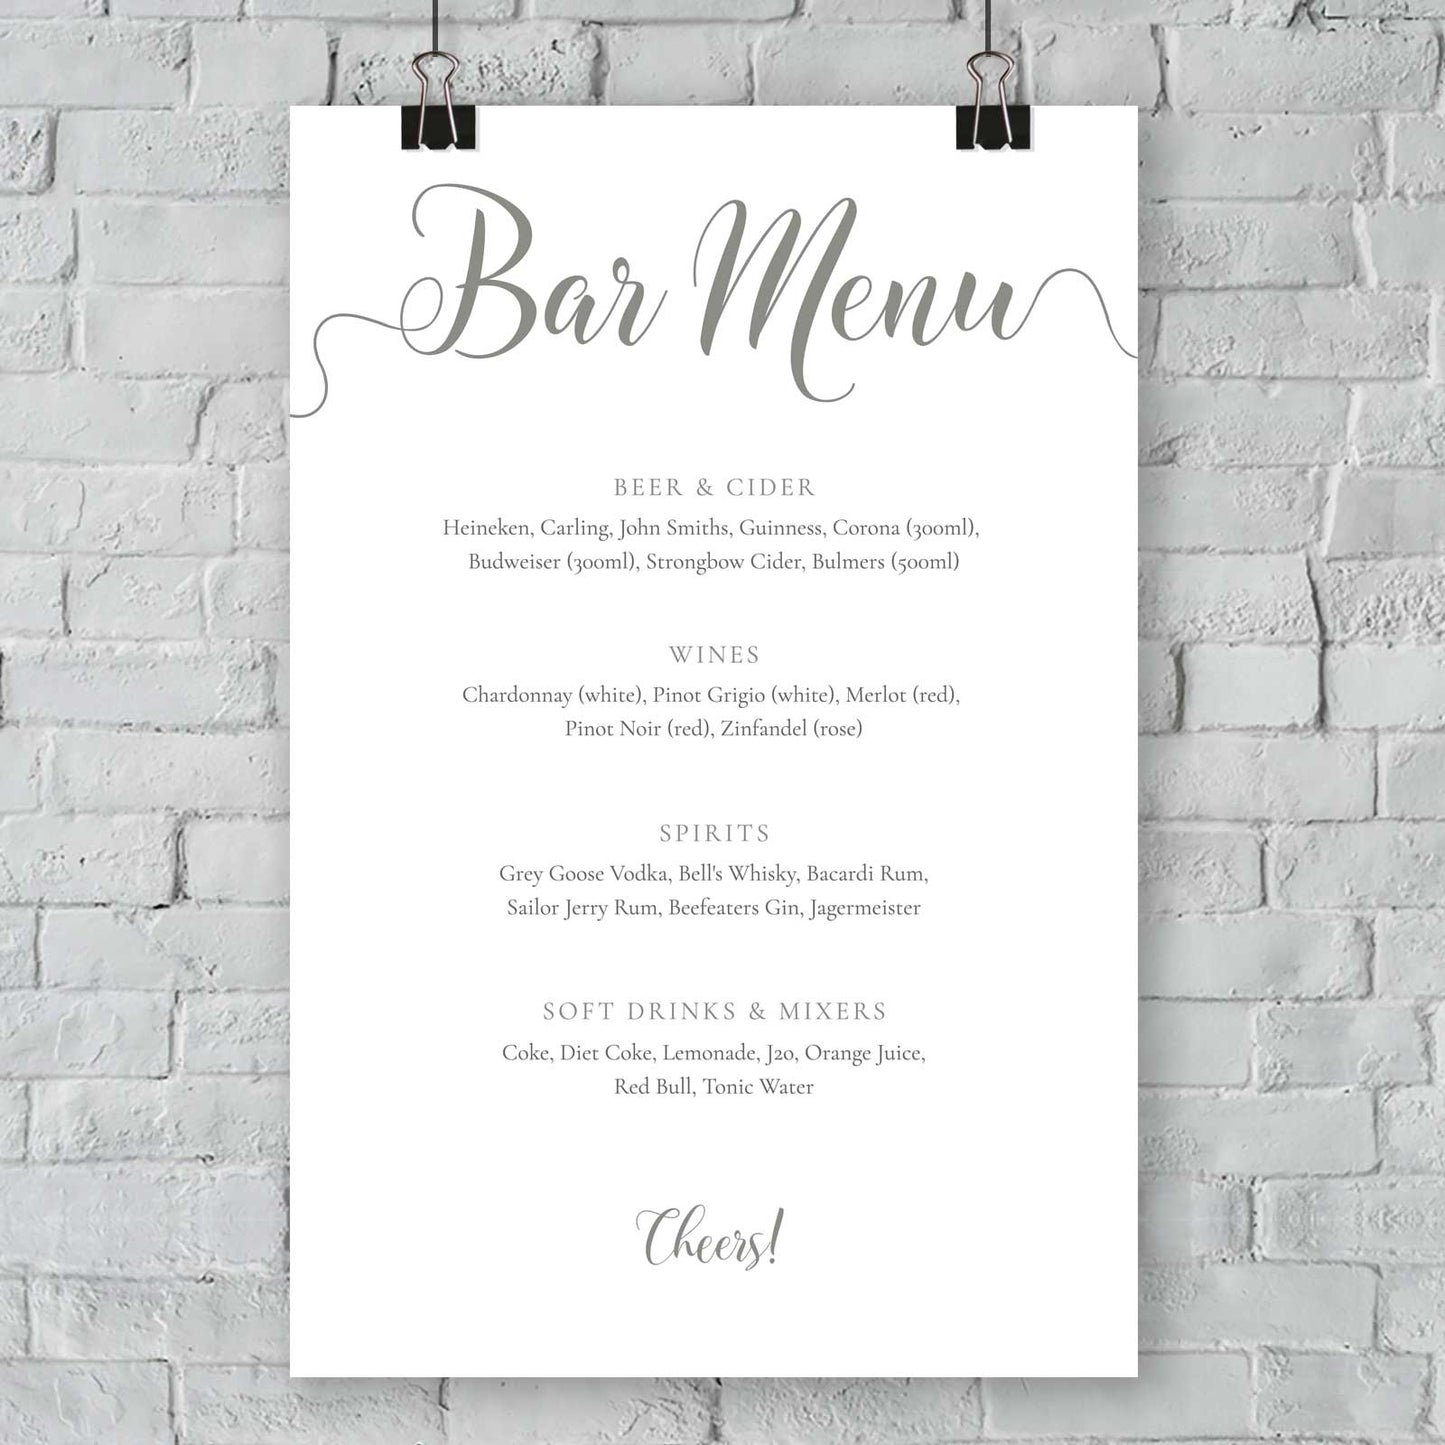 laurel green bar menu template printed on card mounted on a wall